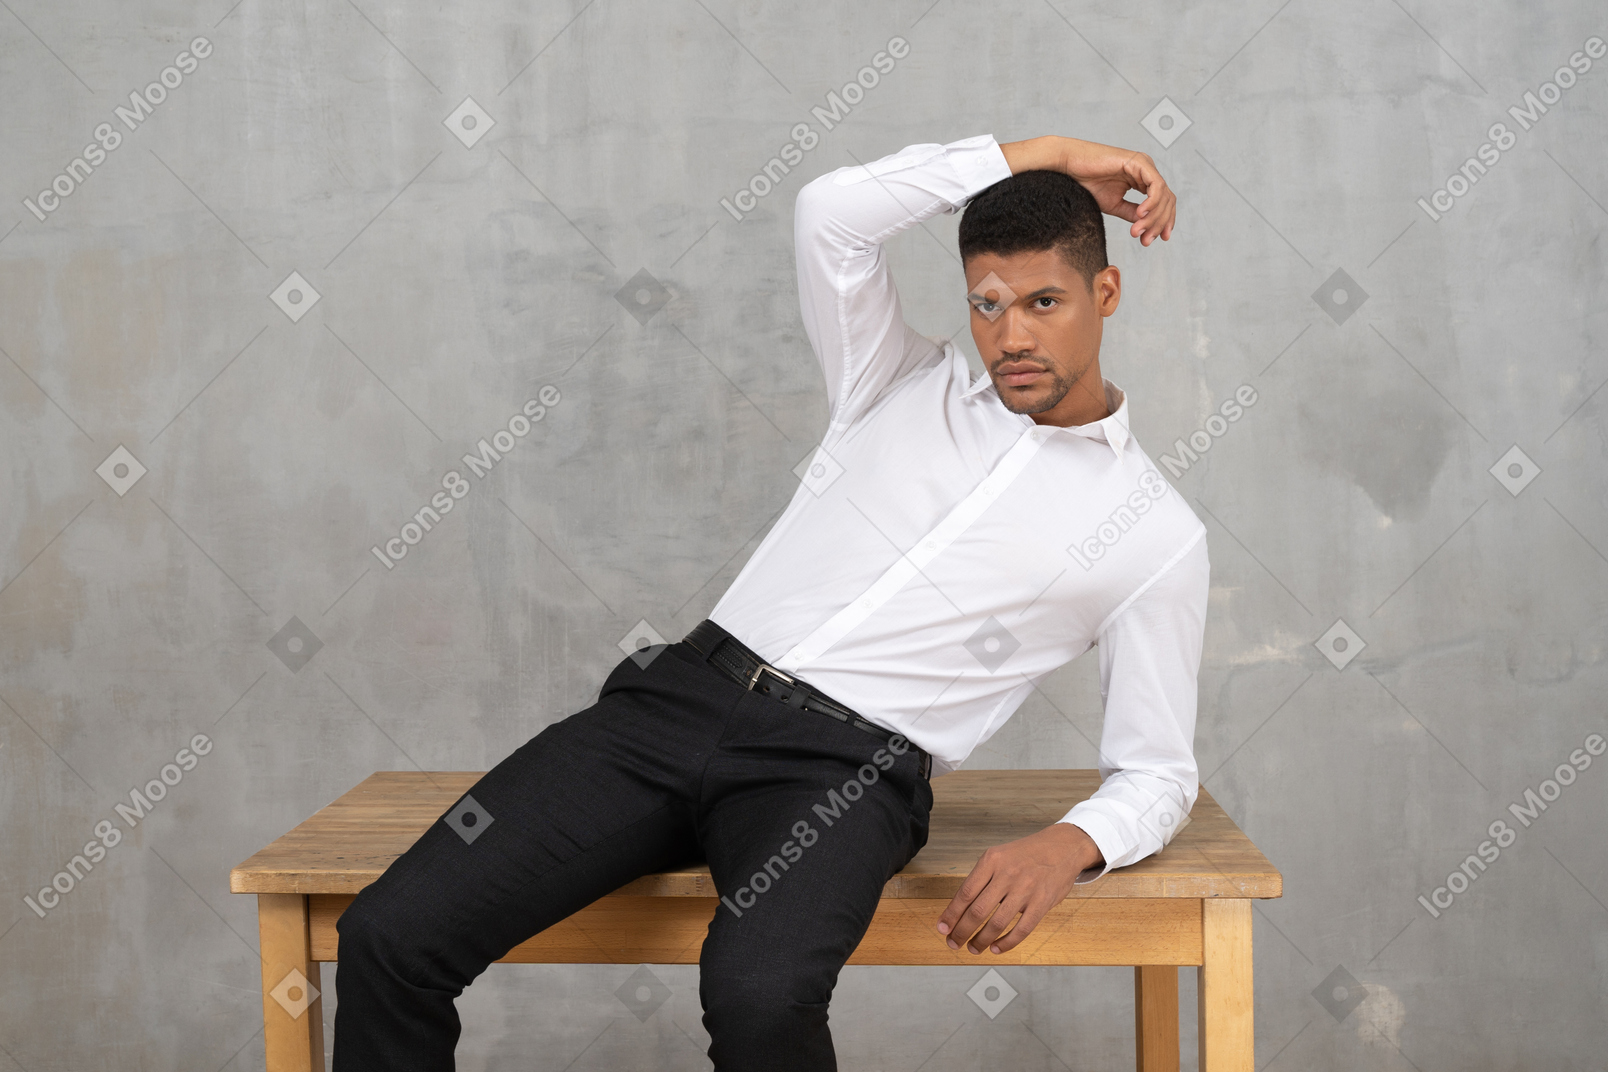 Man in office clothes sitting on a table and posing